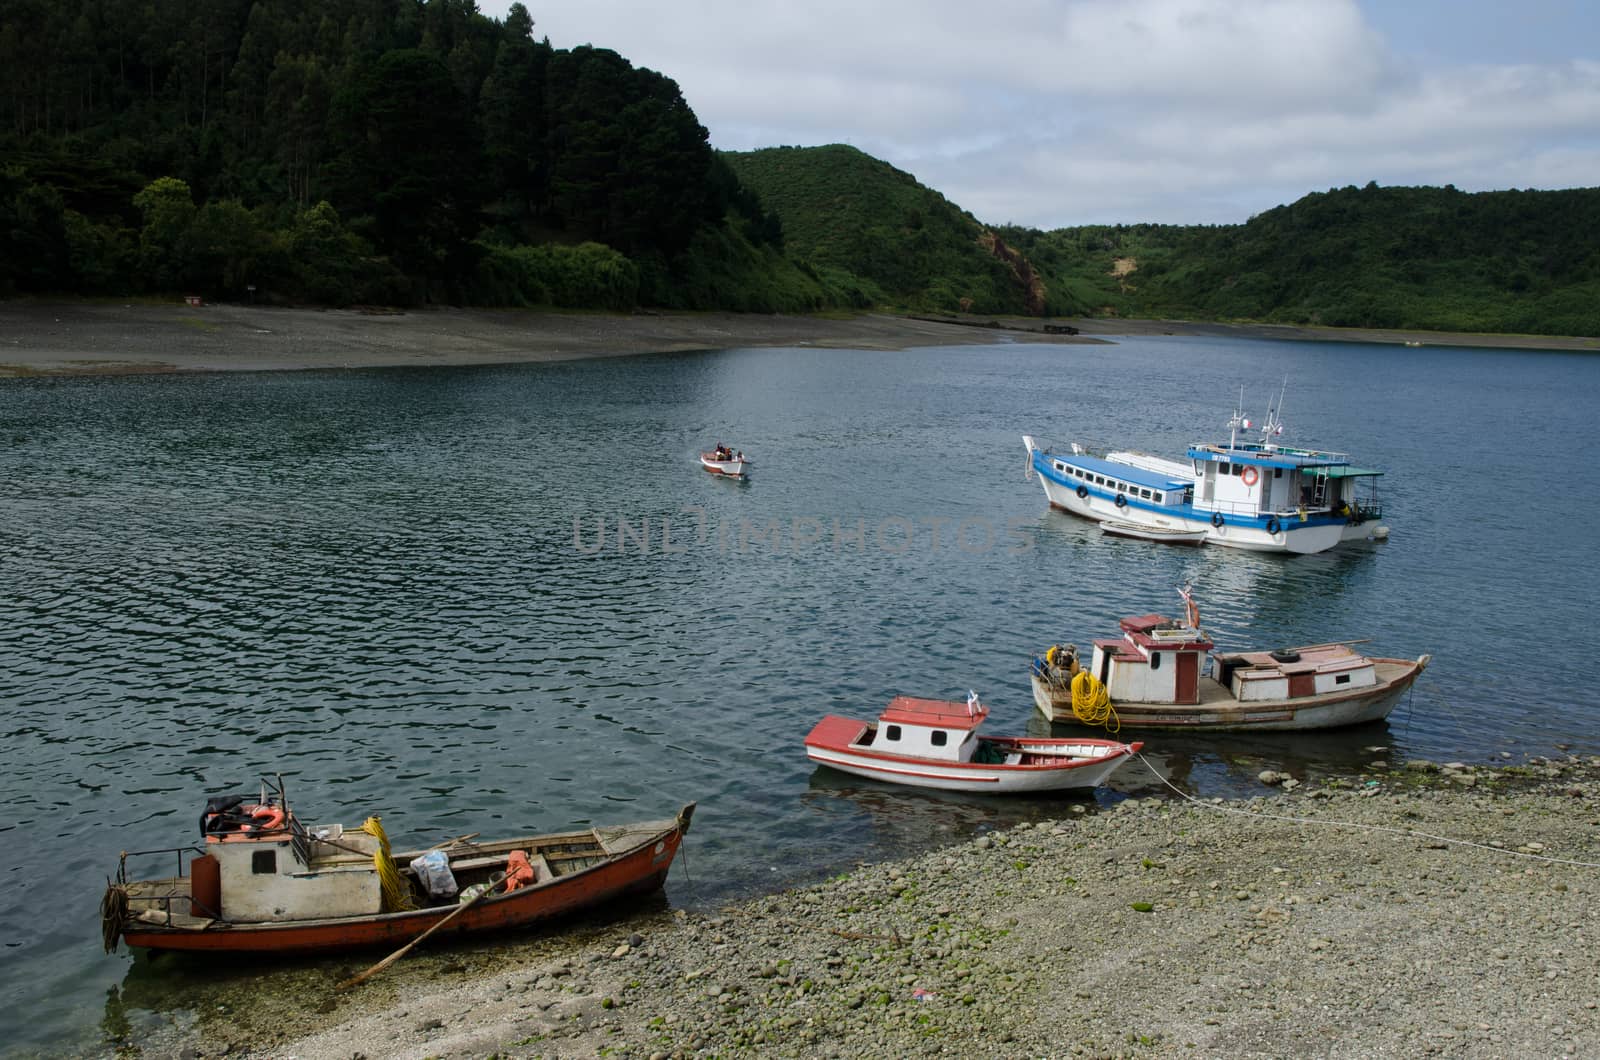 Boats in the district of Angelmo. Puerto Montt. Los Lagos Region. Chile.